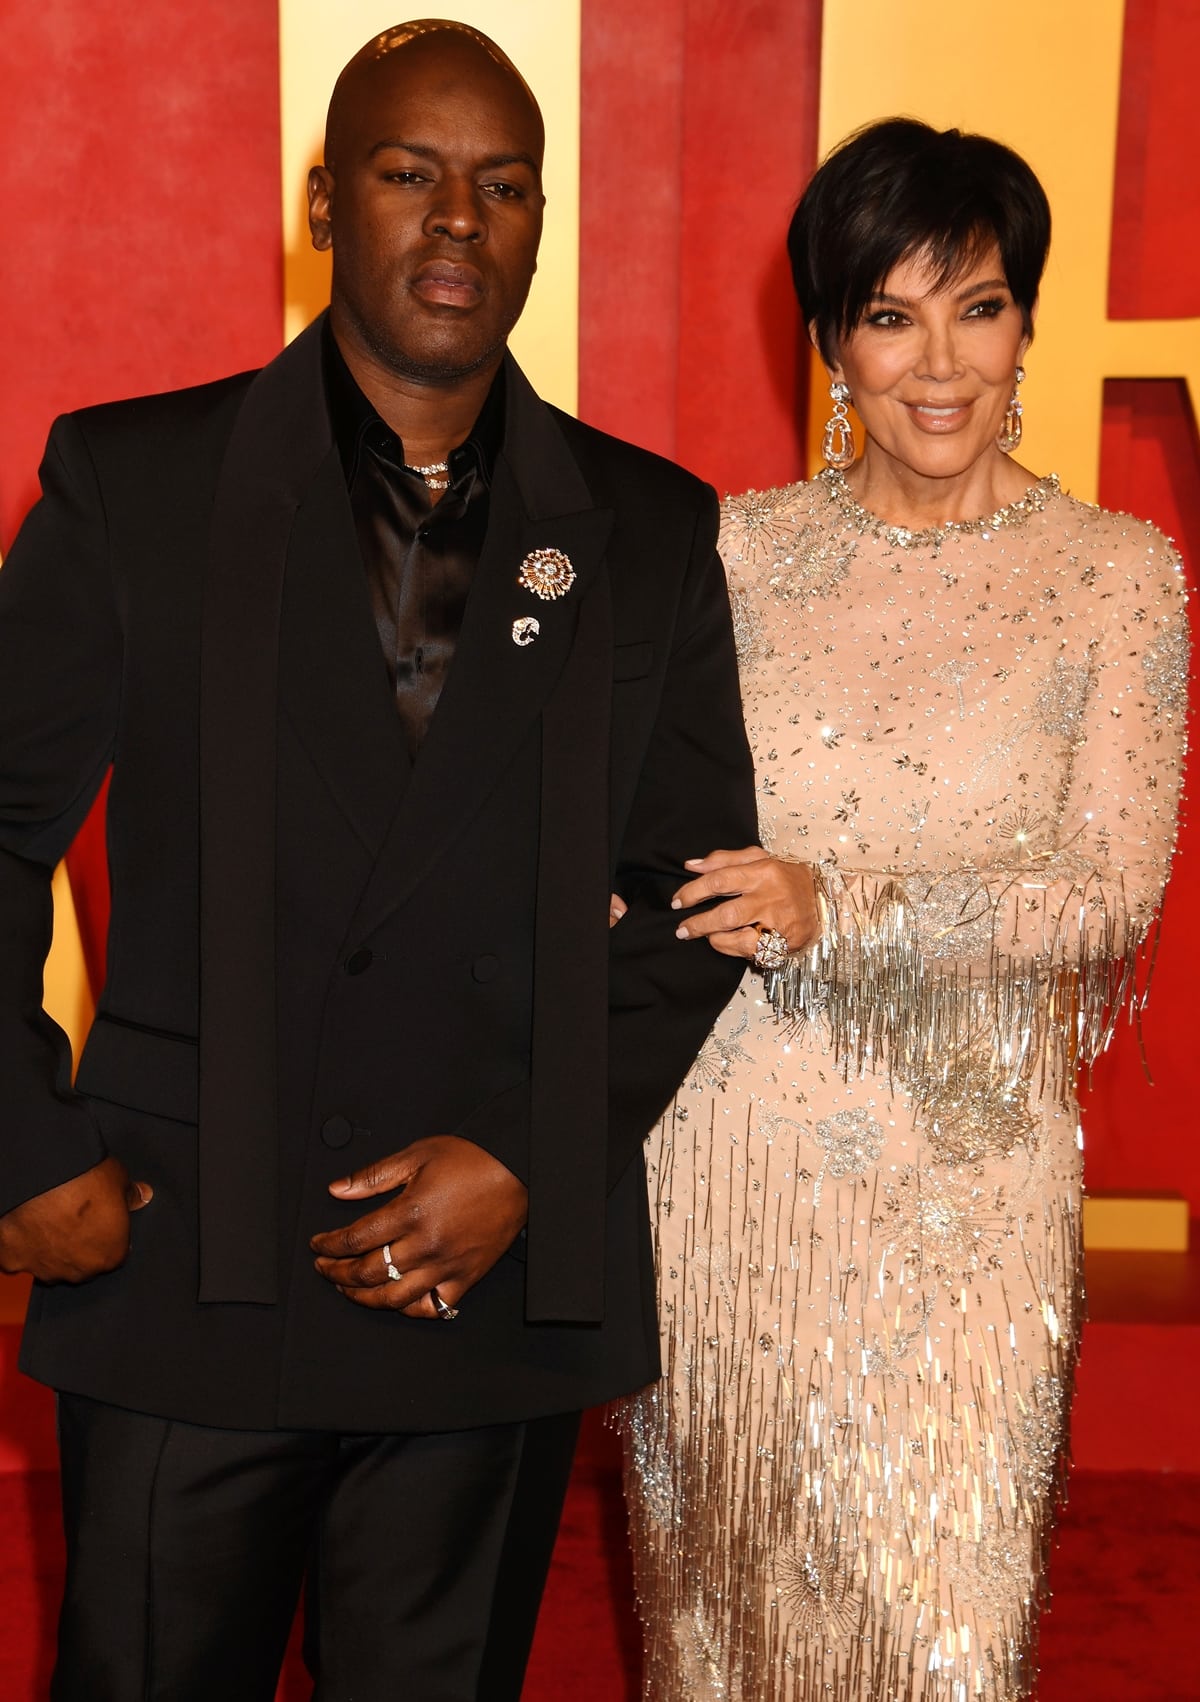 Kris Jenner and Corey Gamble walking hand in hand on the Vanity Fair Oscar Party red carpet, Kris dazzling in a crystal-embroidered Oscar de la Renta gown and Corey in a classic black tuxedo